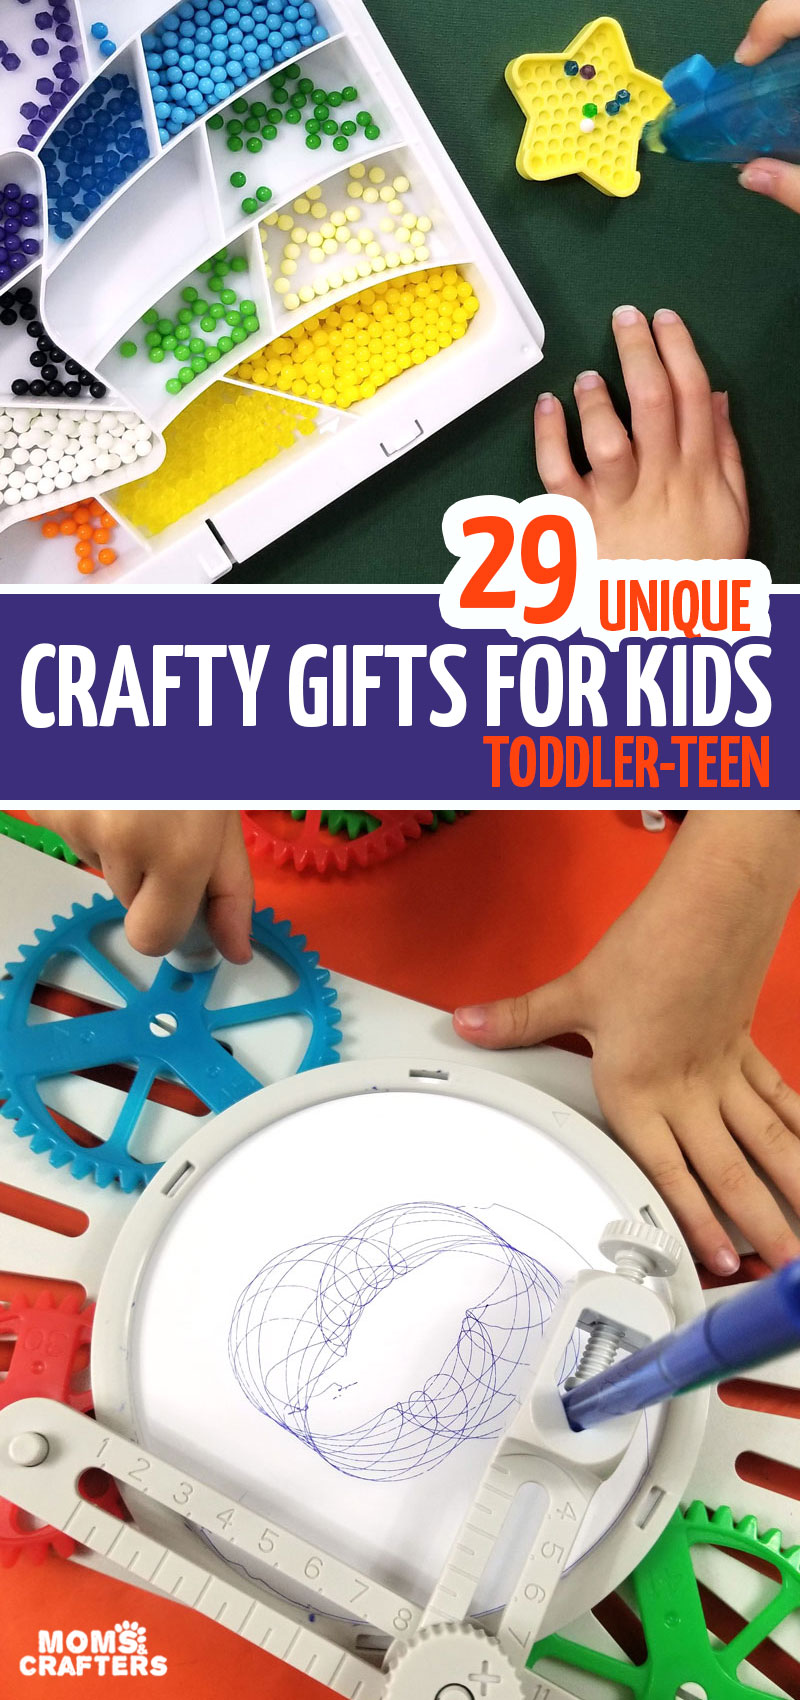 Gift Guide for Artsy and Creative Kids - Home Crafts by Ali